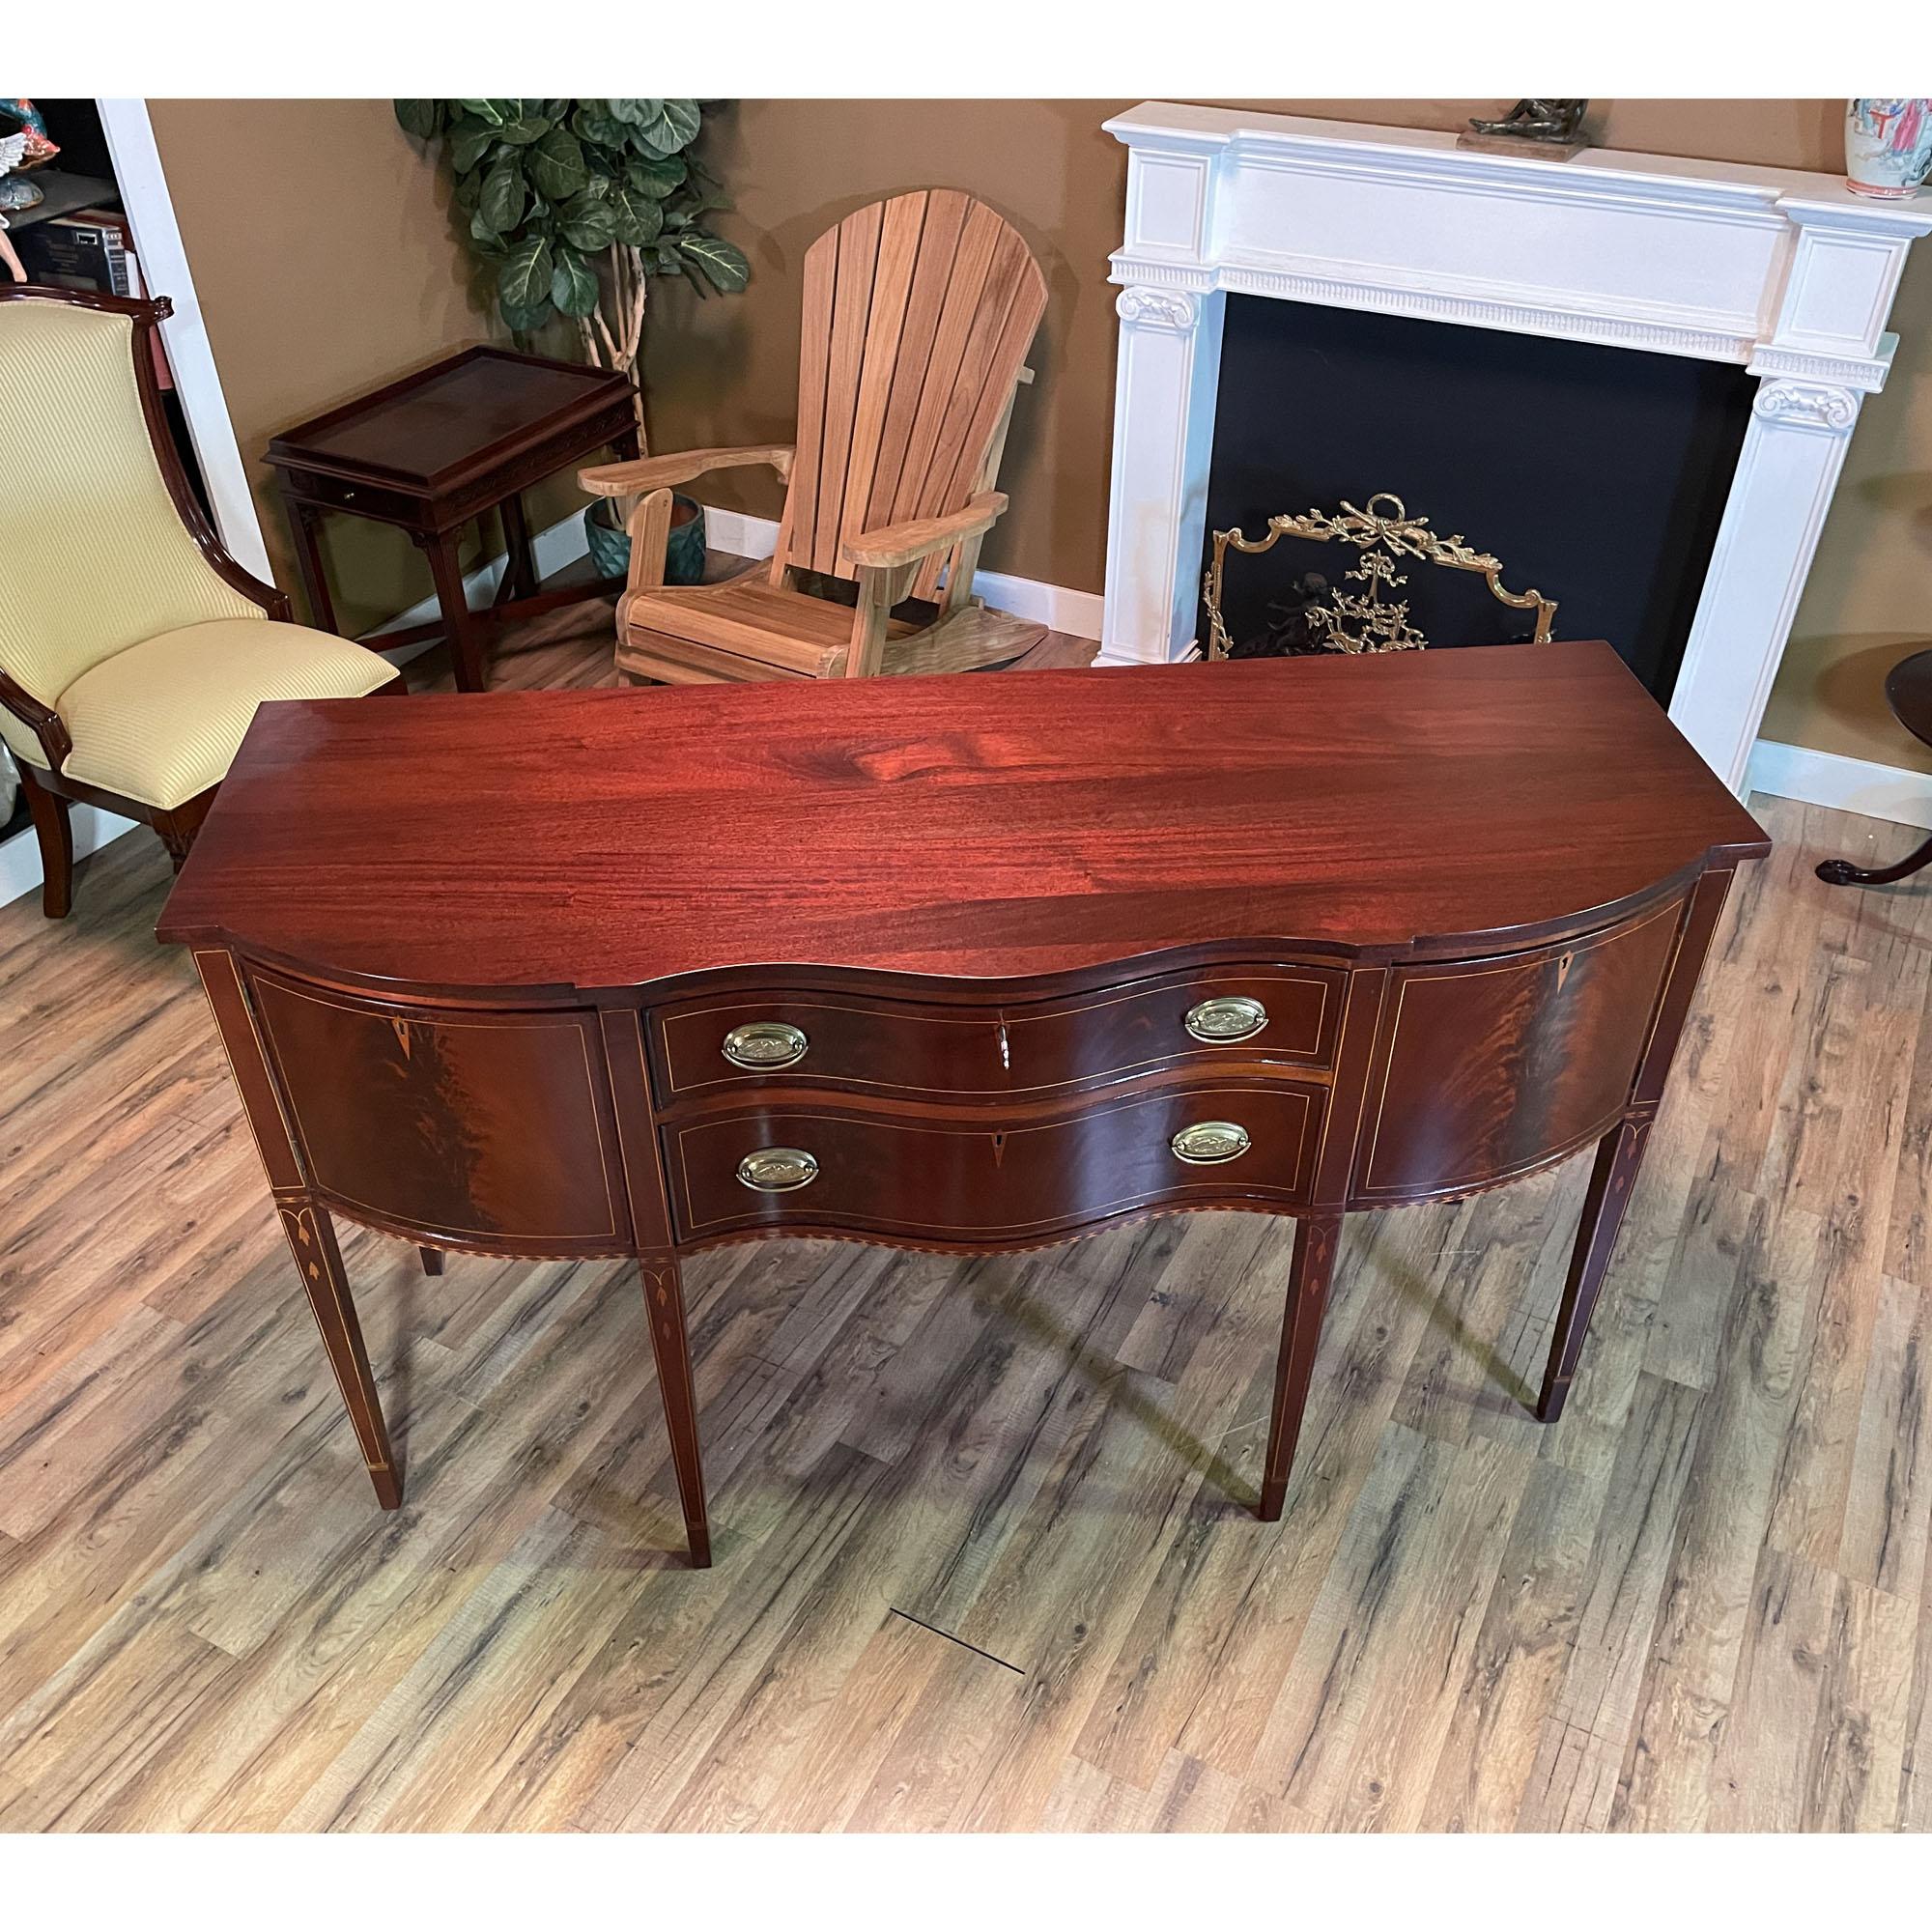 A Vintage Henkel Harris inlaid sideboard in excellent condition with a freshly hand rubbed top giving the sideboard a clean appearance.

Simple yet sophisticated this beautiful Henkel Harris Sideboard has everything going for it. A slightly deeper